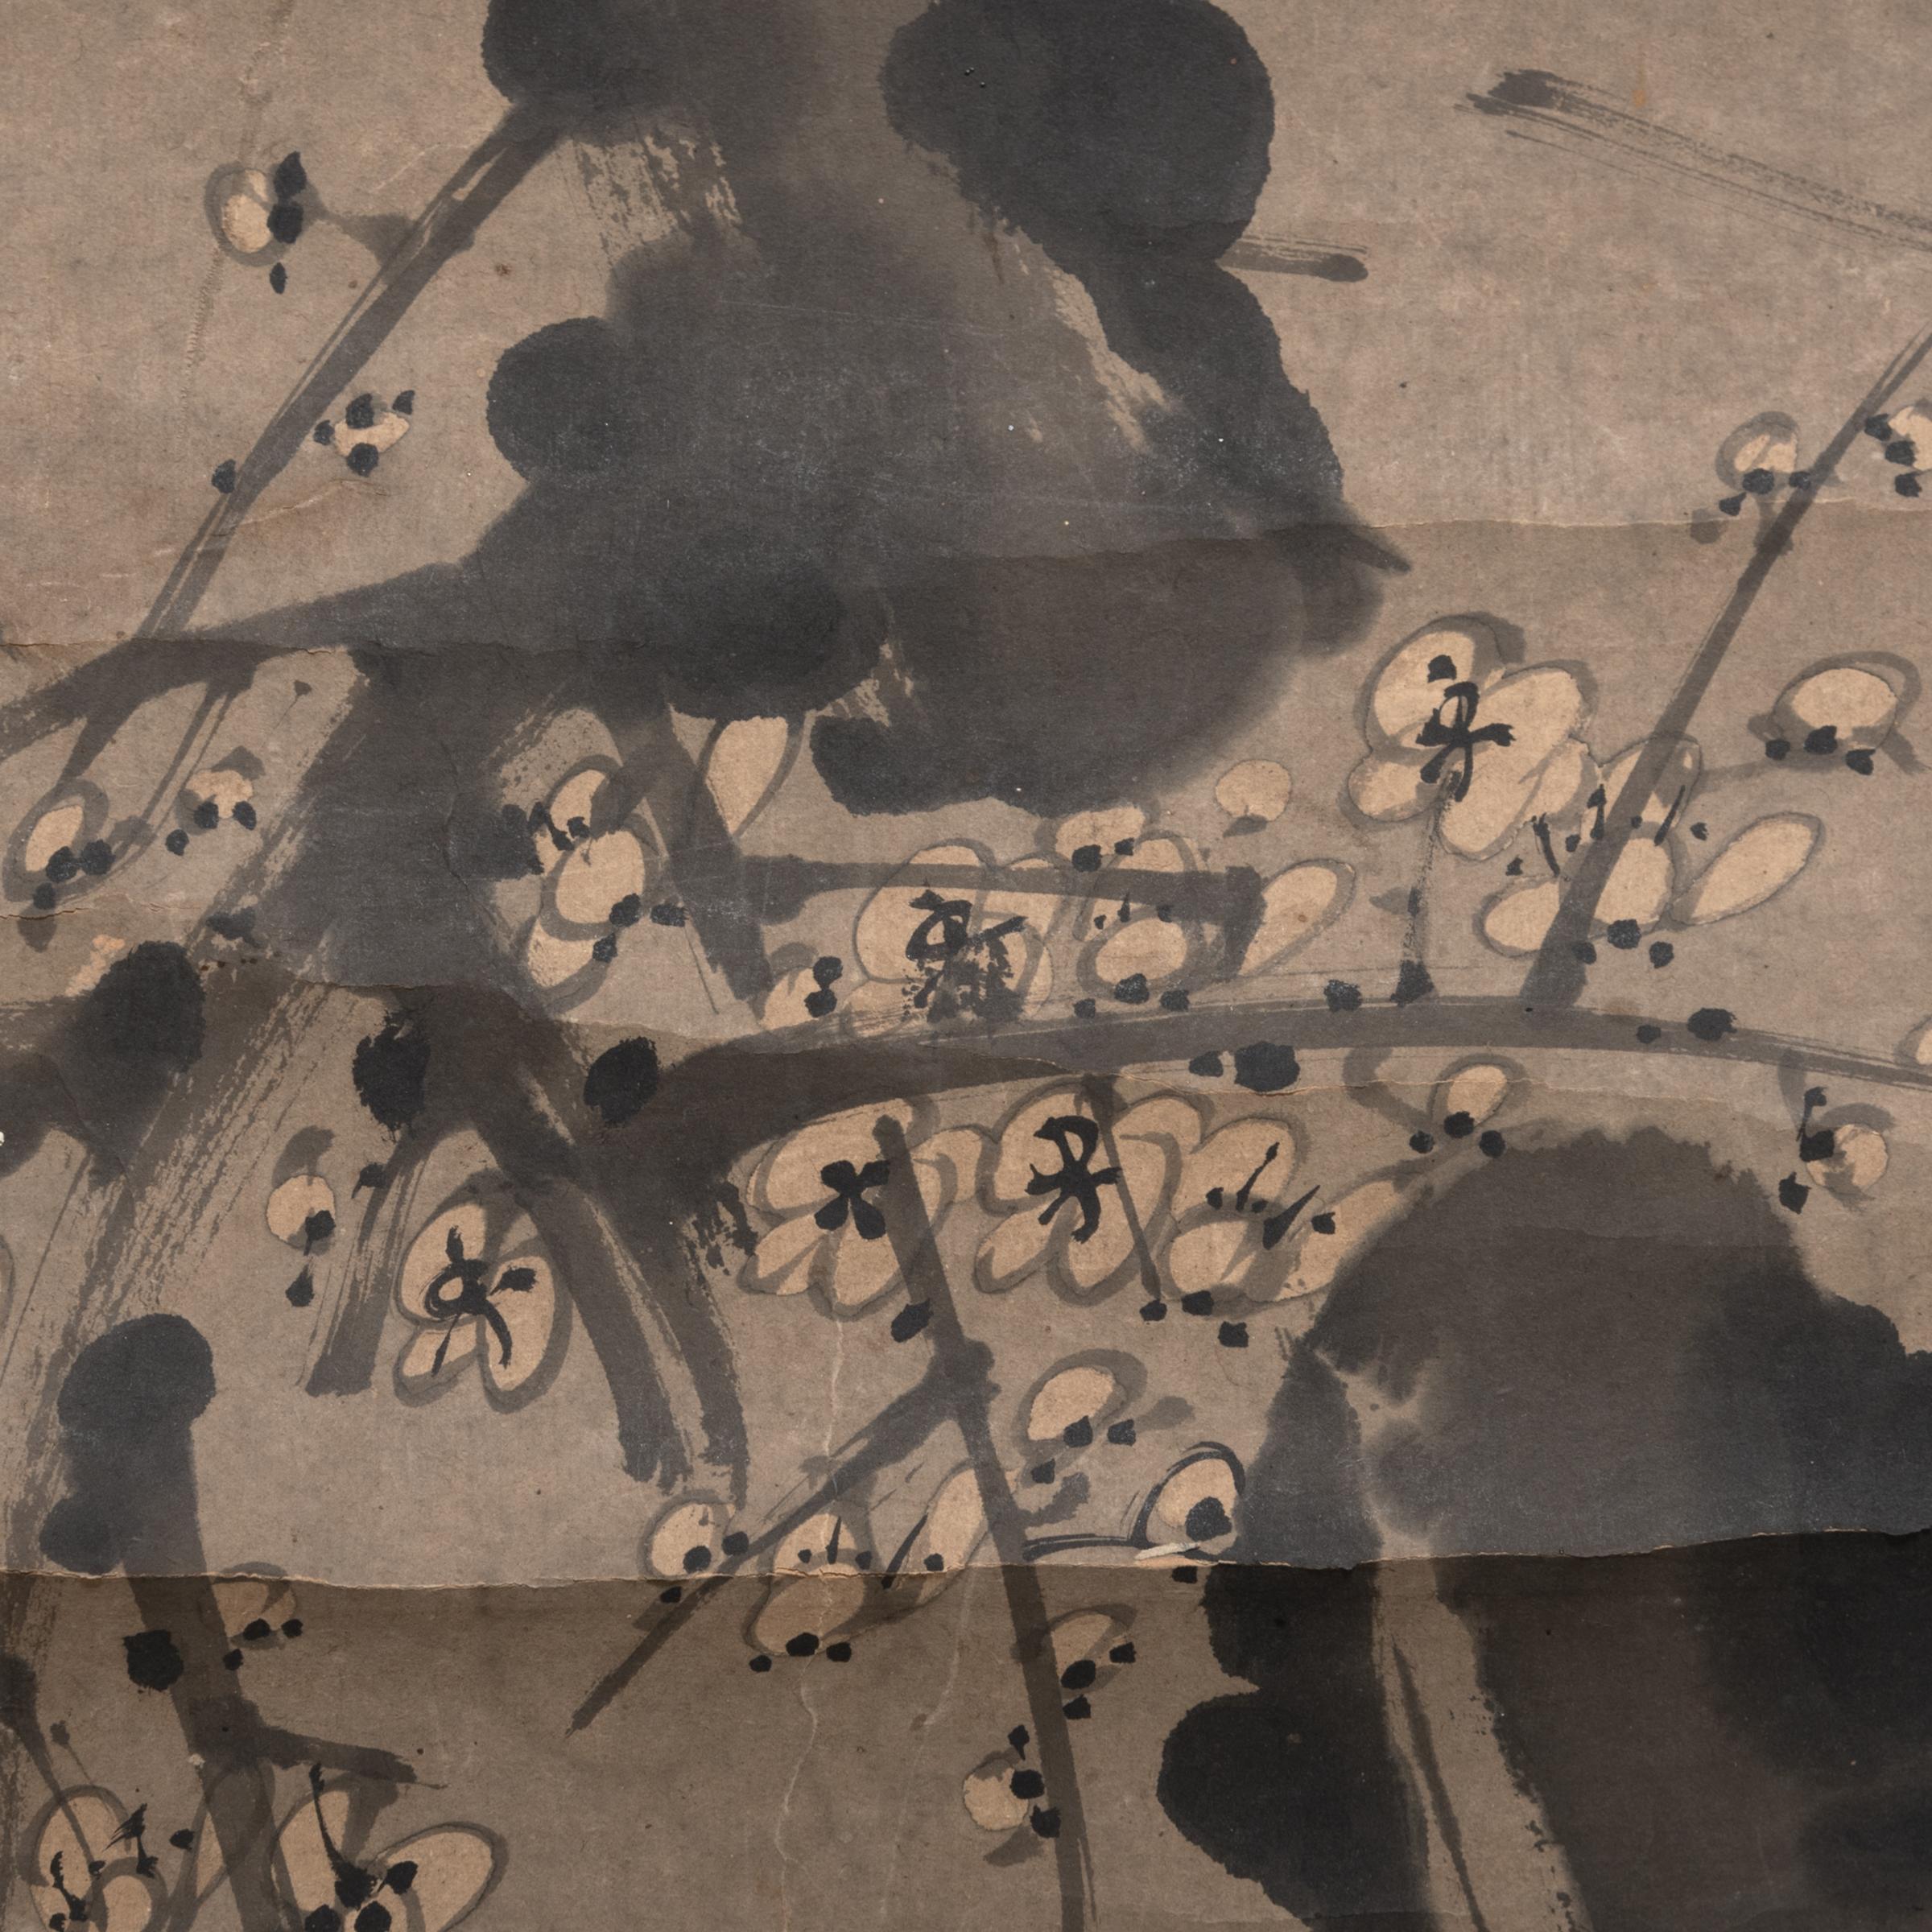 Chinese scholars used natural imagery and scenery to aid in contemplation within the walls of their studios. The complex beauty inherent to landscapes and natural forms inspired clear and concise thinking. It's this emphasis on natural imagery that